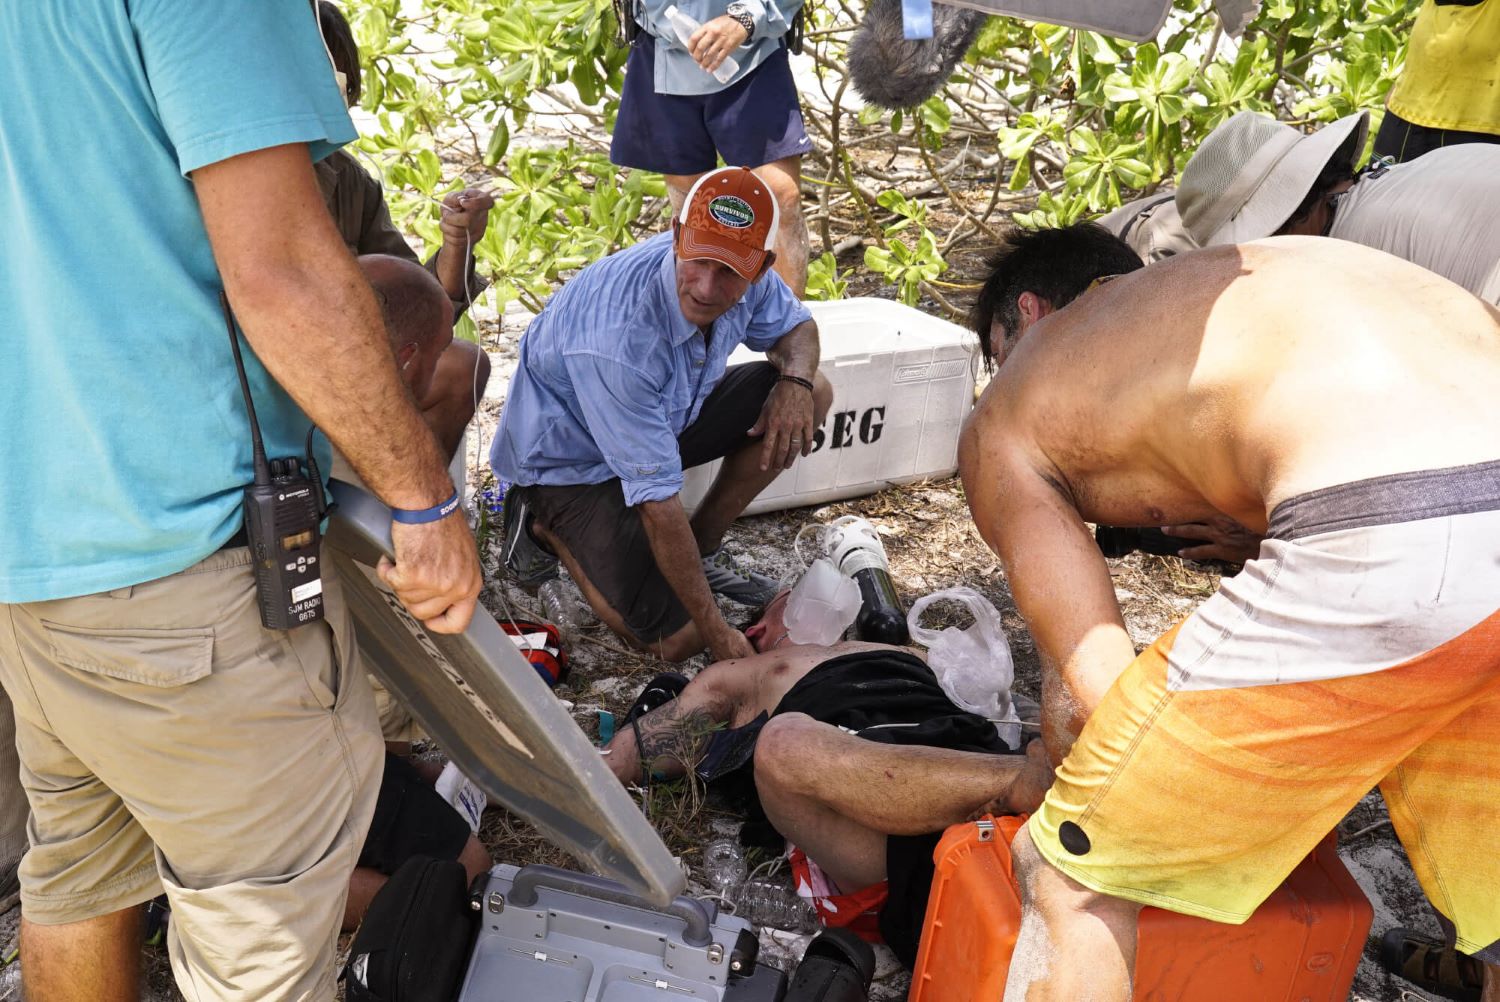 Jeff Probst, the Medical Team, and Nick Maiorano assess the condition of Caleb Reynolds during the fourth episode of 'Survivor' Season 32.